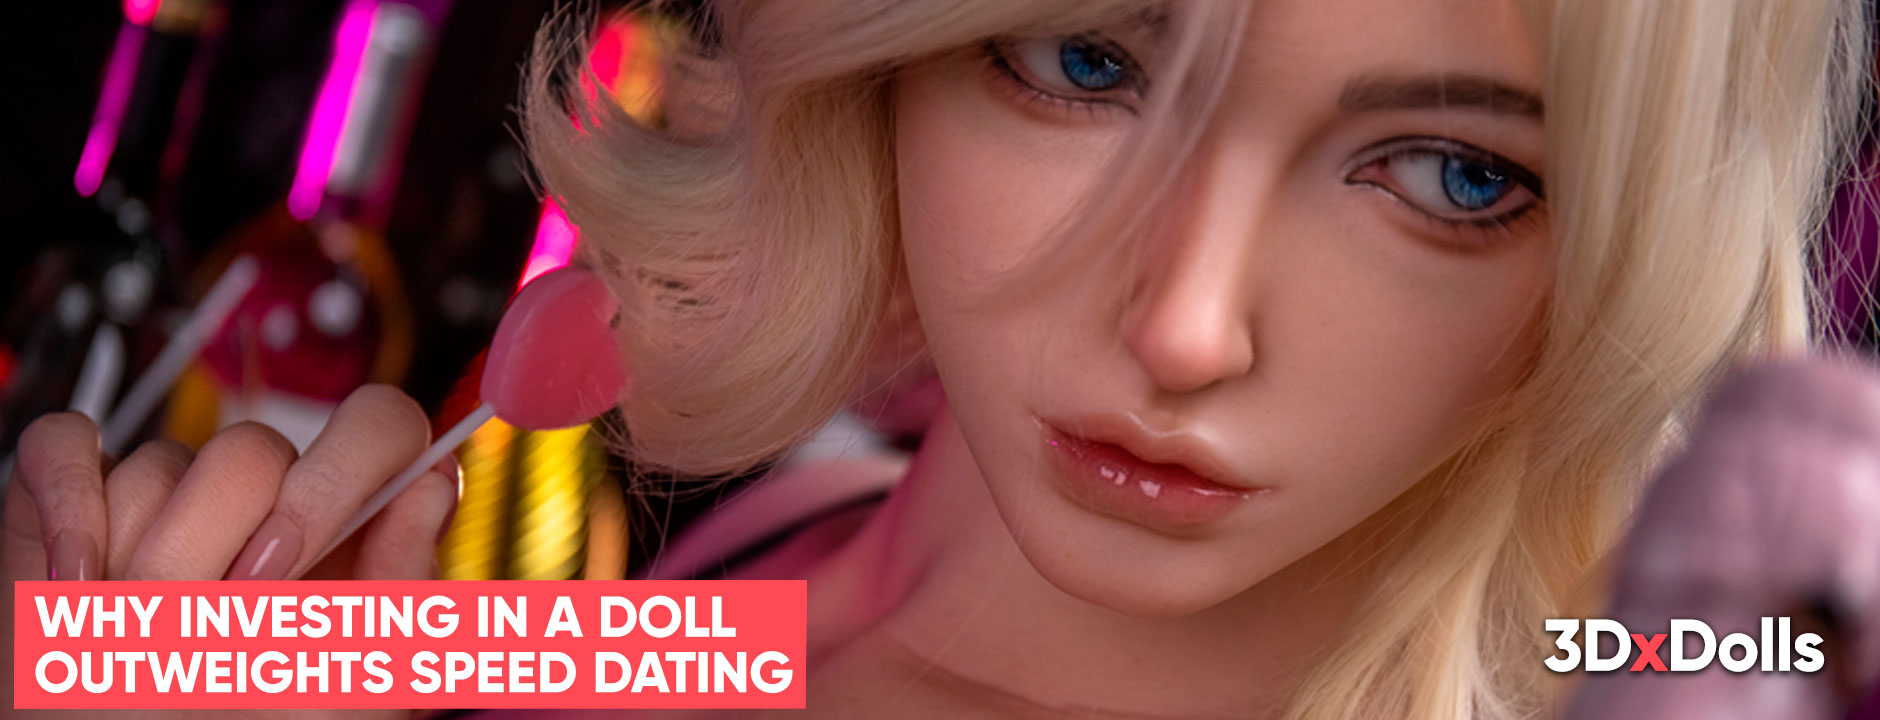 Why Investing in a Love Doll Might Outweigh Speed Dating